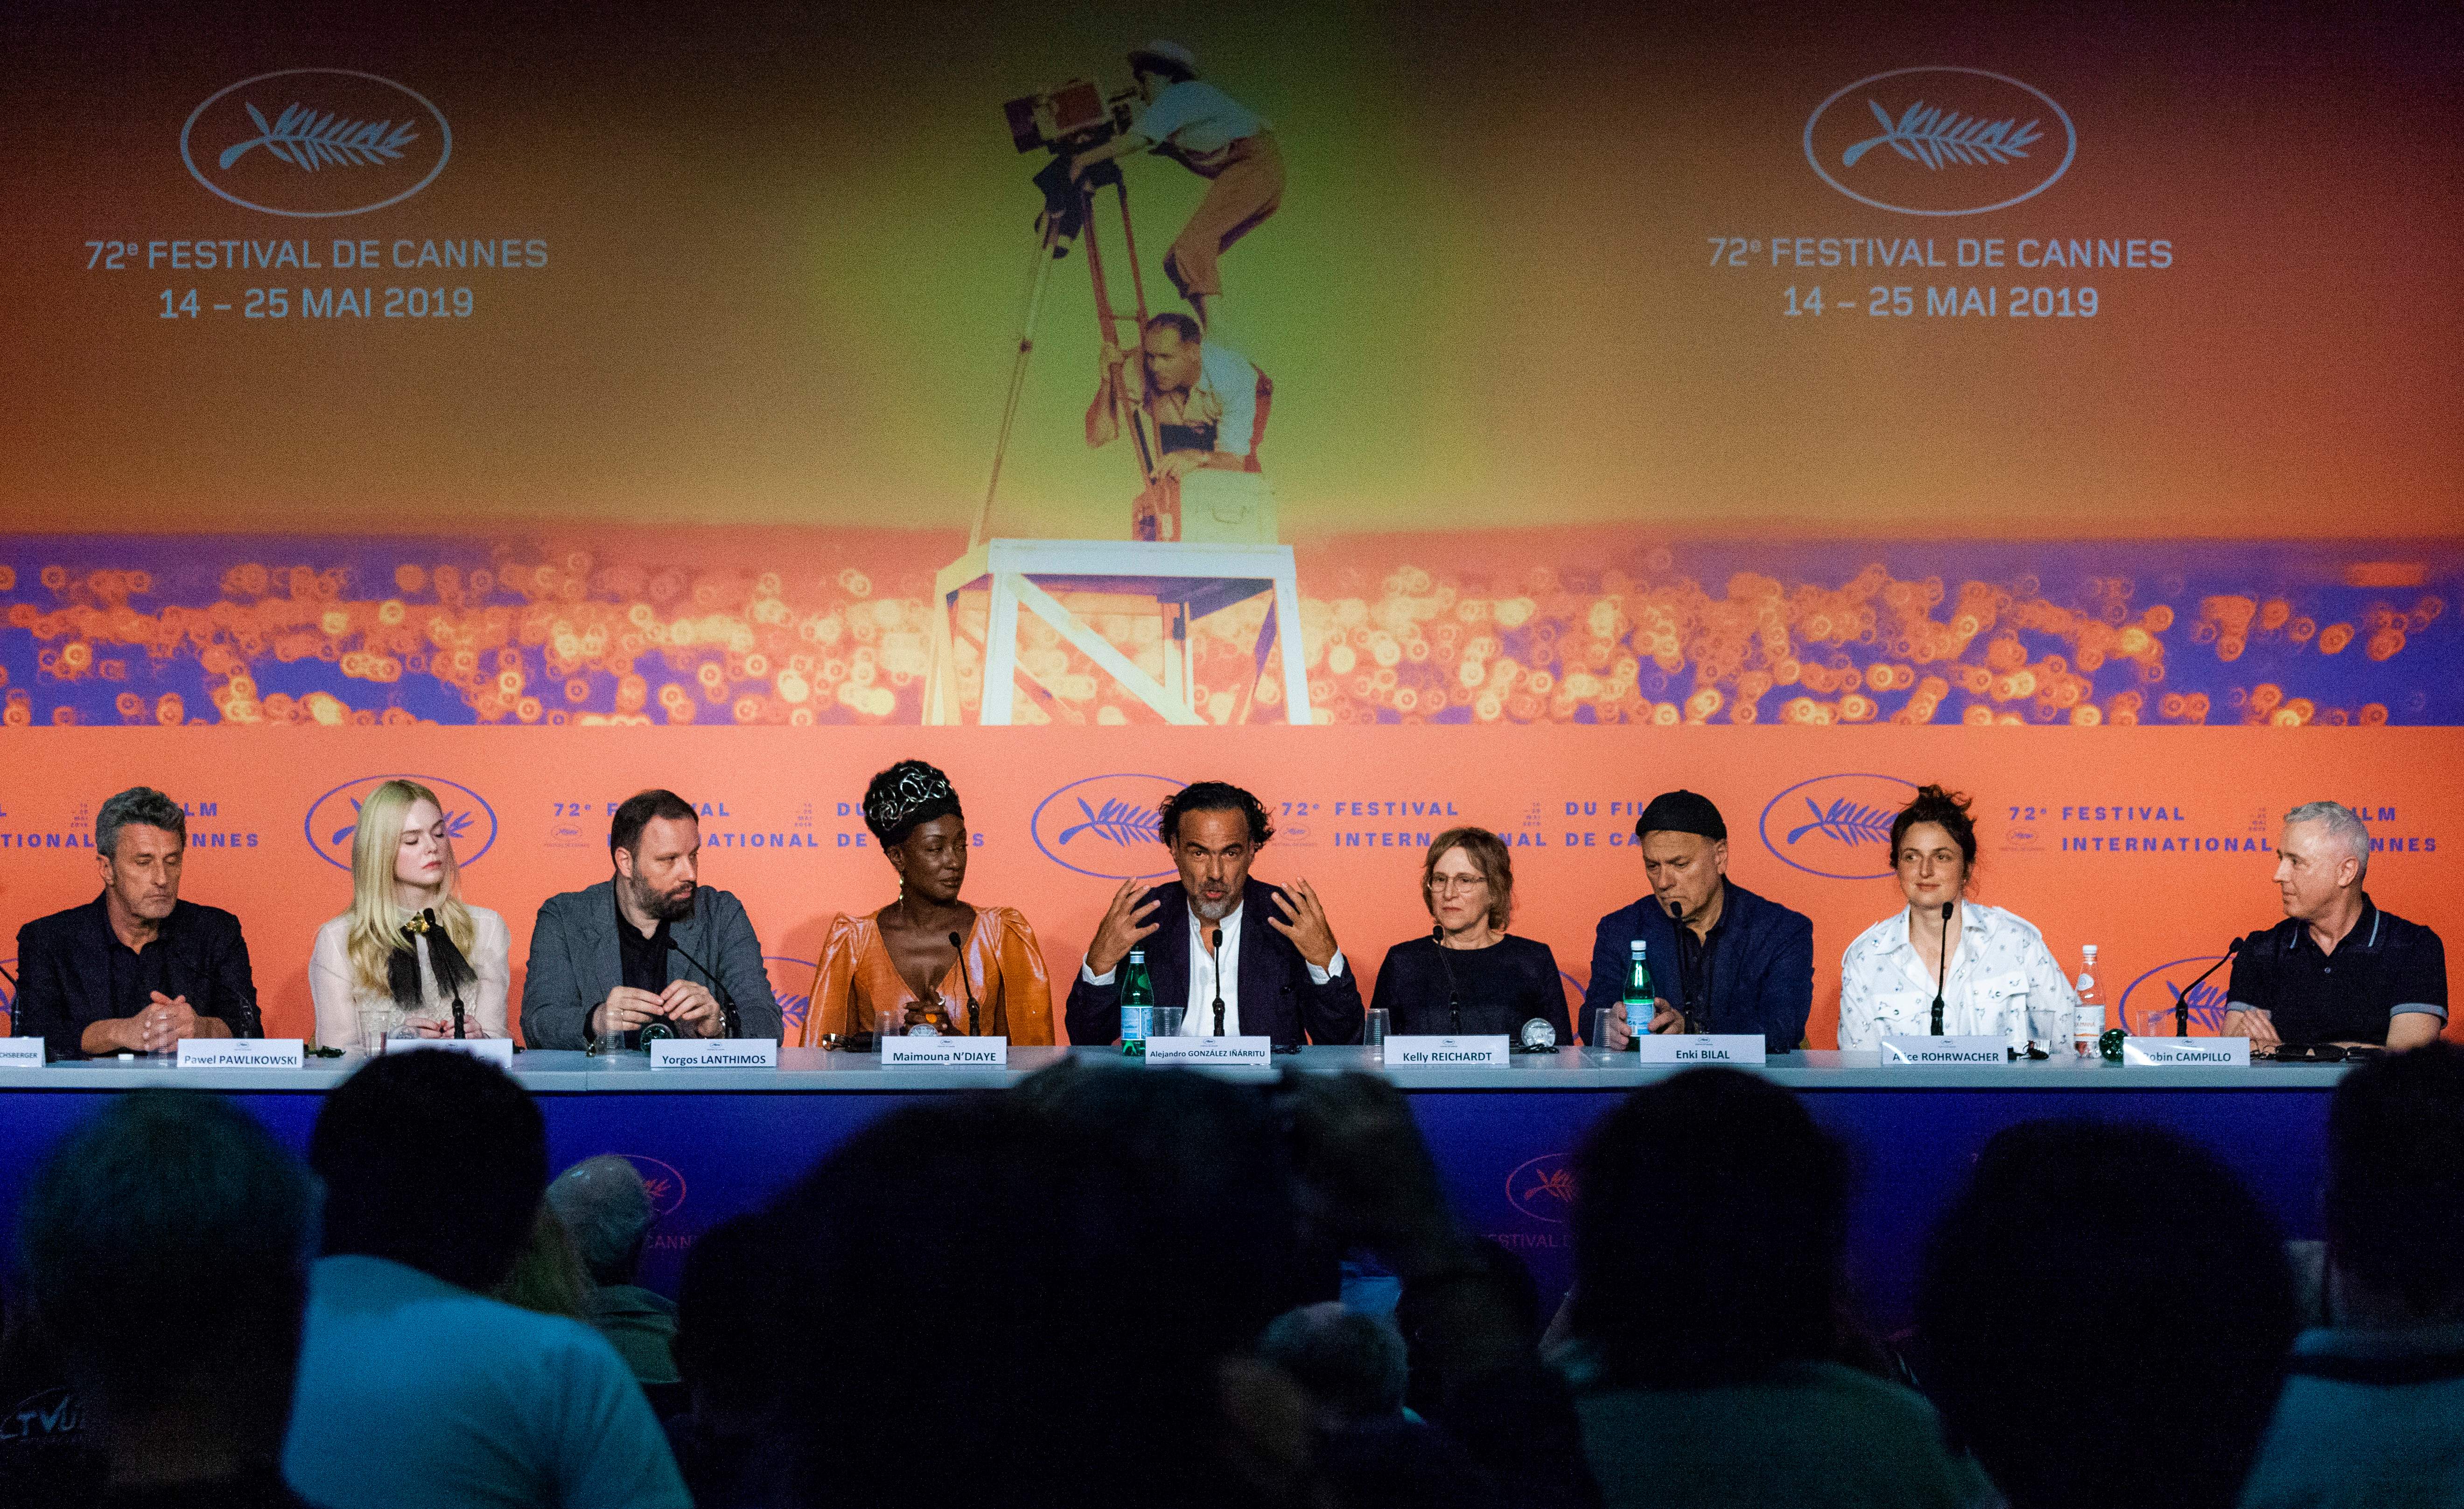 72nd Cannes Film Festival: News and Details - AwardsWatch